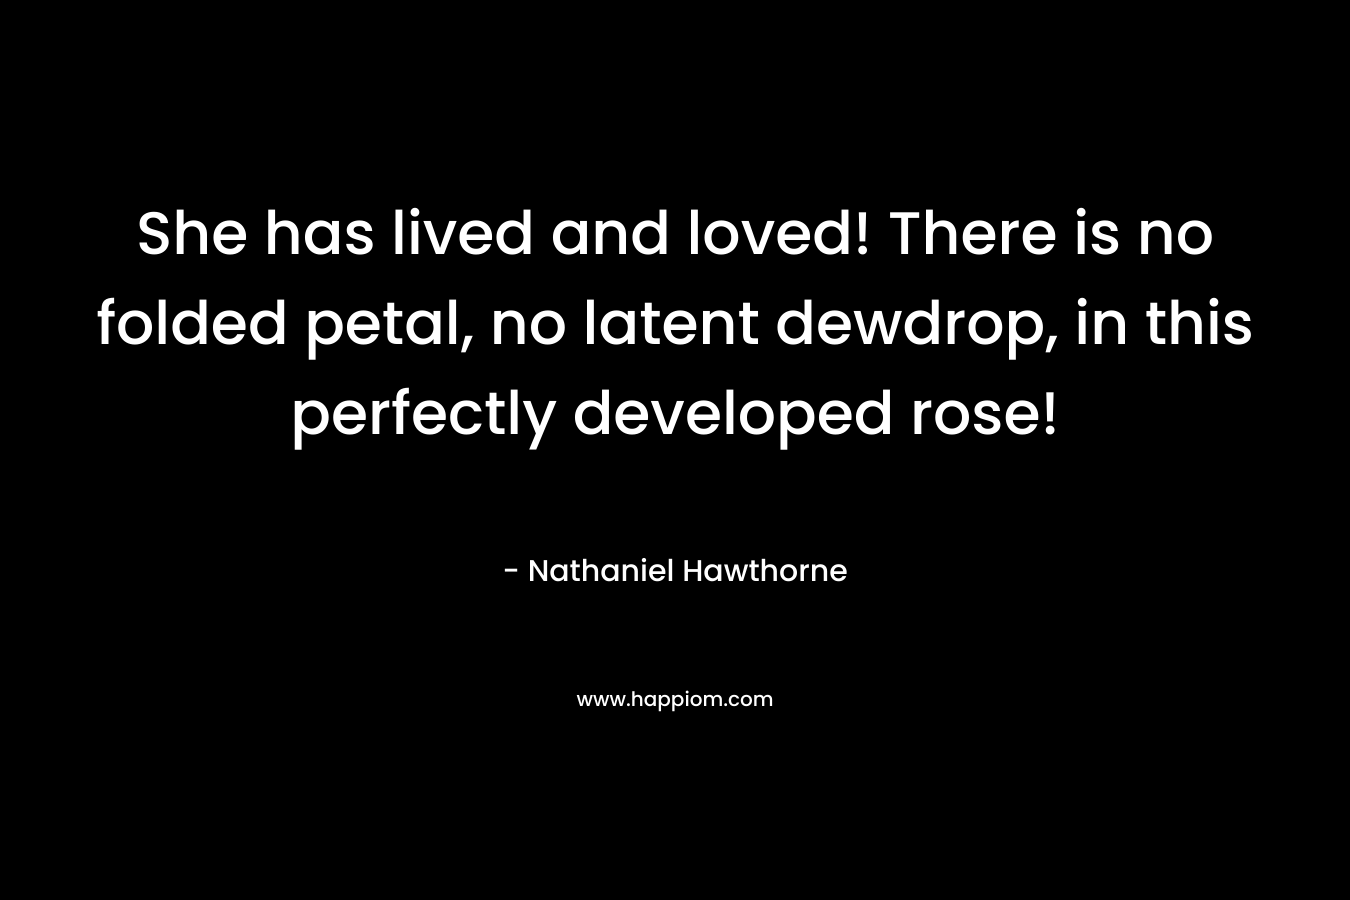 She has lived and loved! There is no folded petal, no latent dewdrop, in this perfectly developed rose!